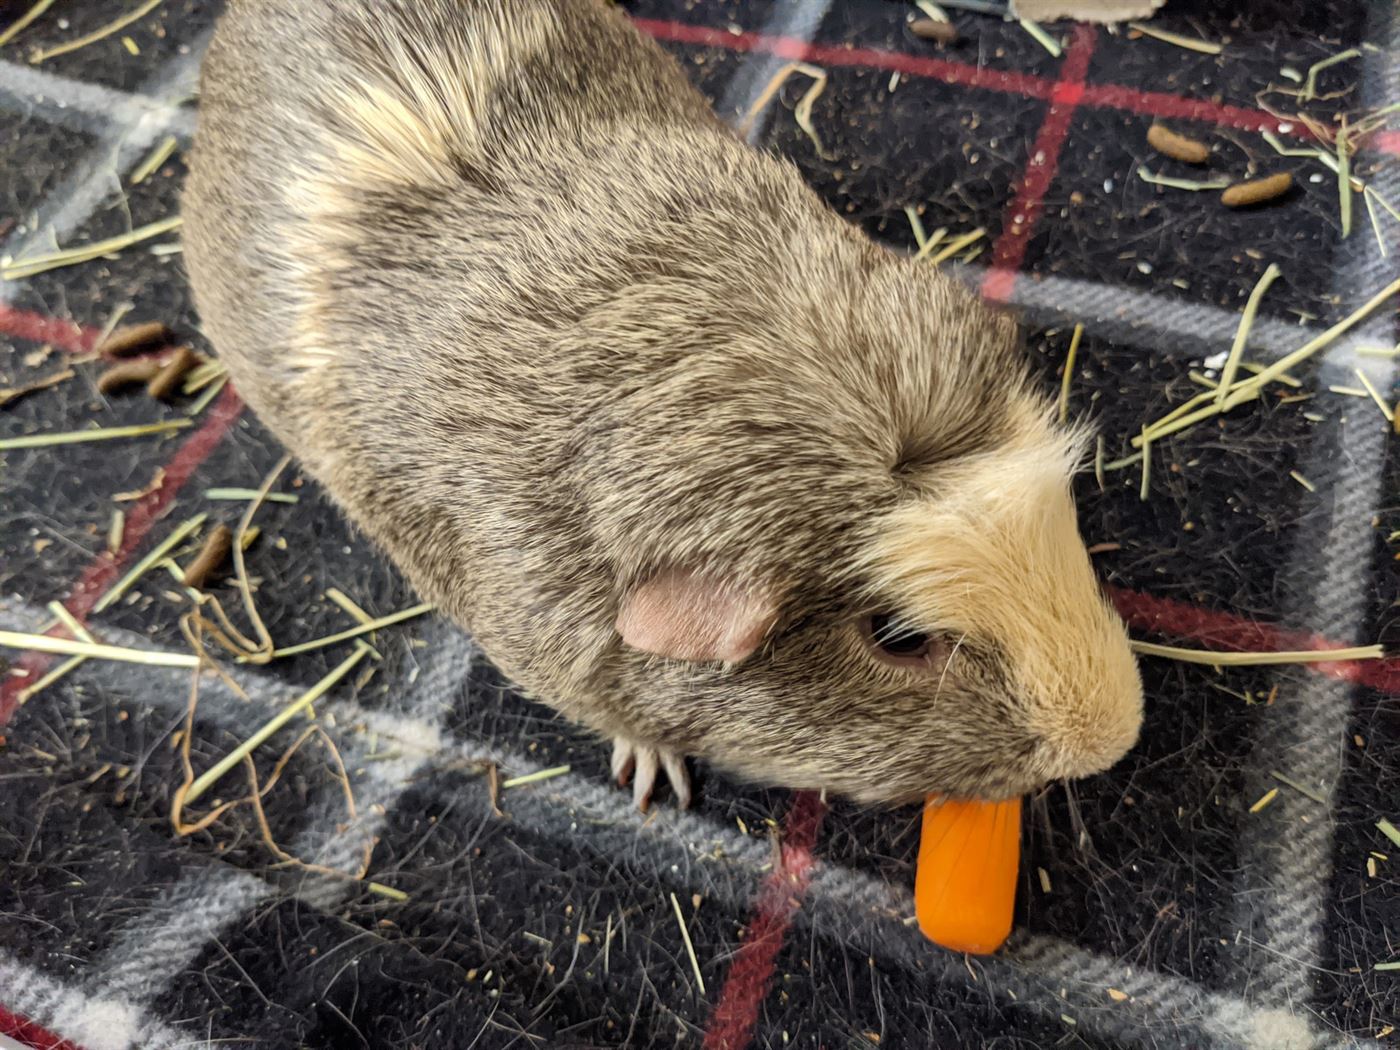 Wicket enjoys a carrot. Casey Masterson | The Montclarion